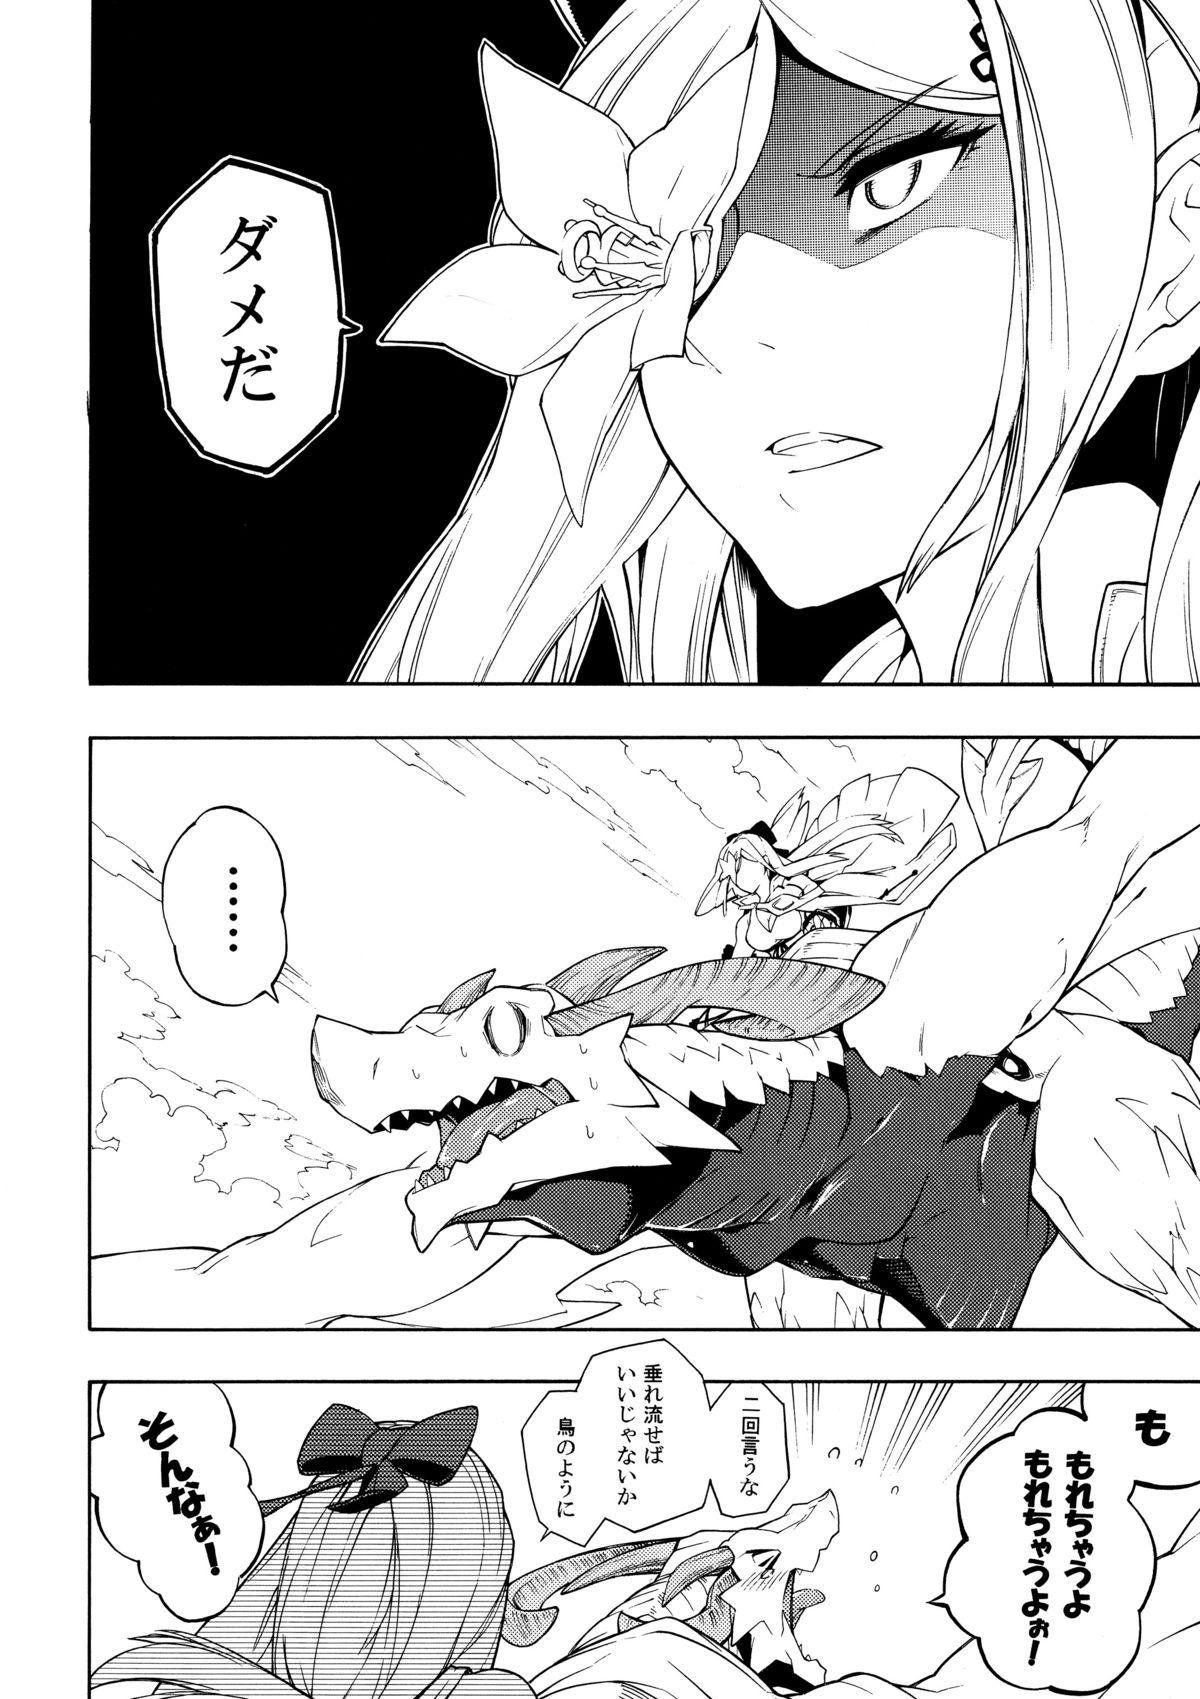 Bro MIKHAIL FORTUNE - Drakengard Clothed Sex - Page 7